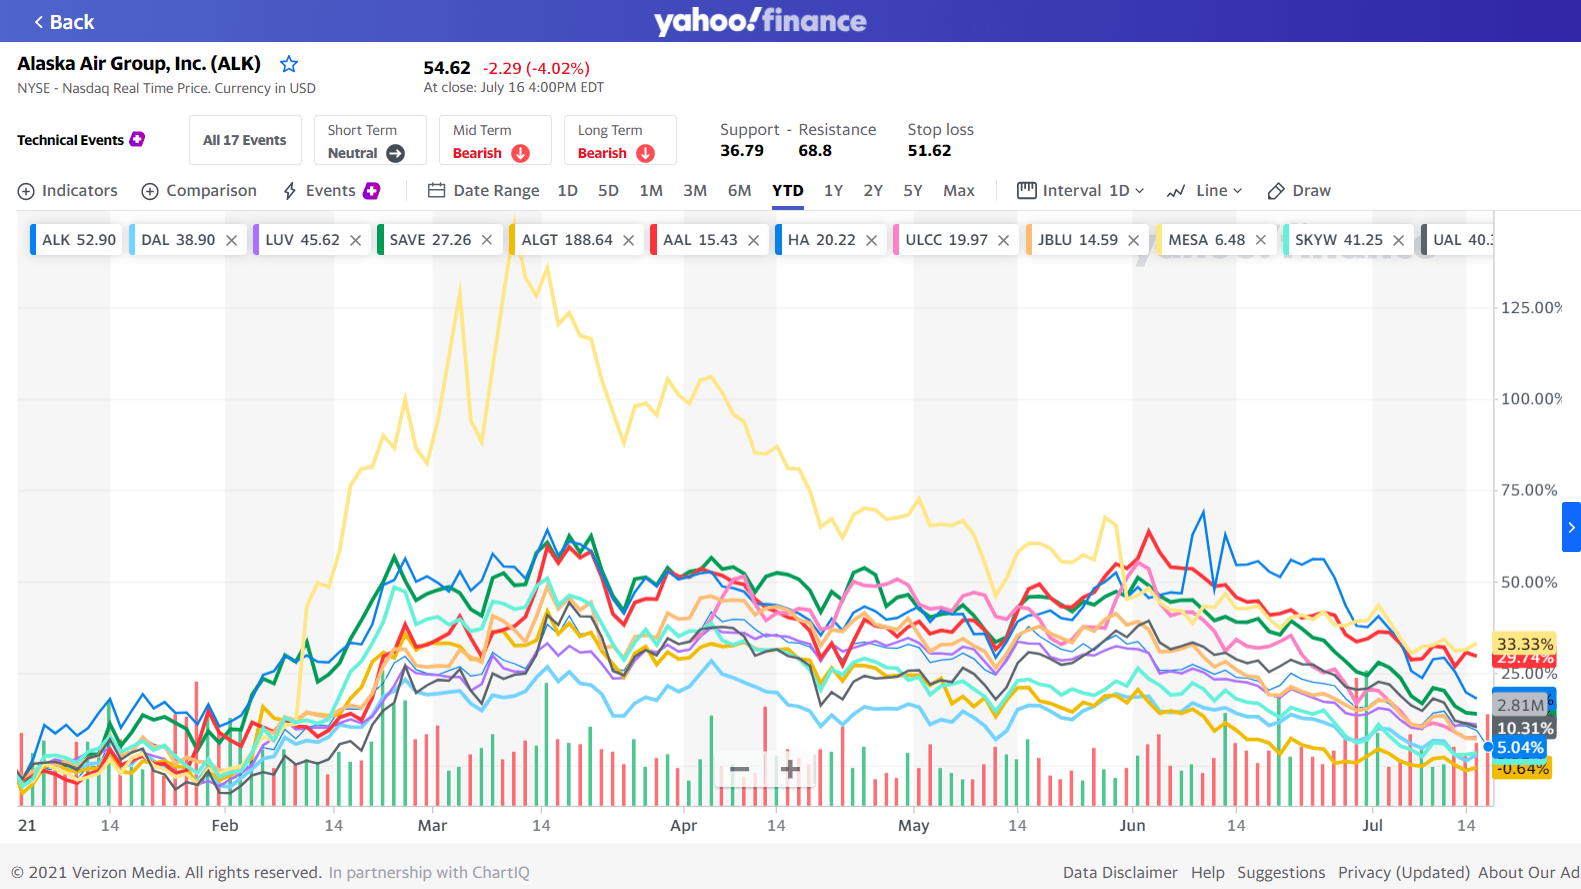 Quick Check on the Performance of U.S. Airline Stocks so far This Year